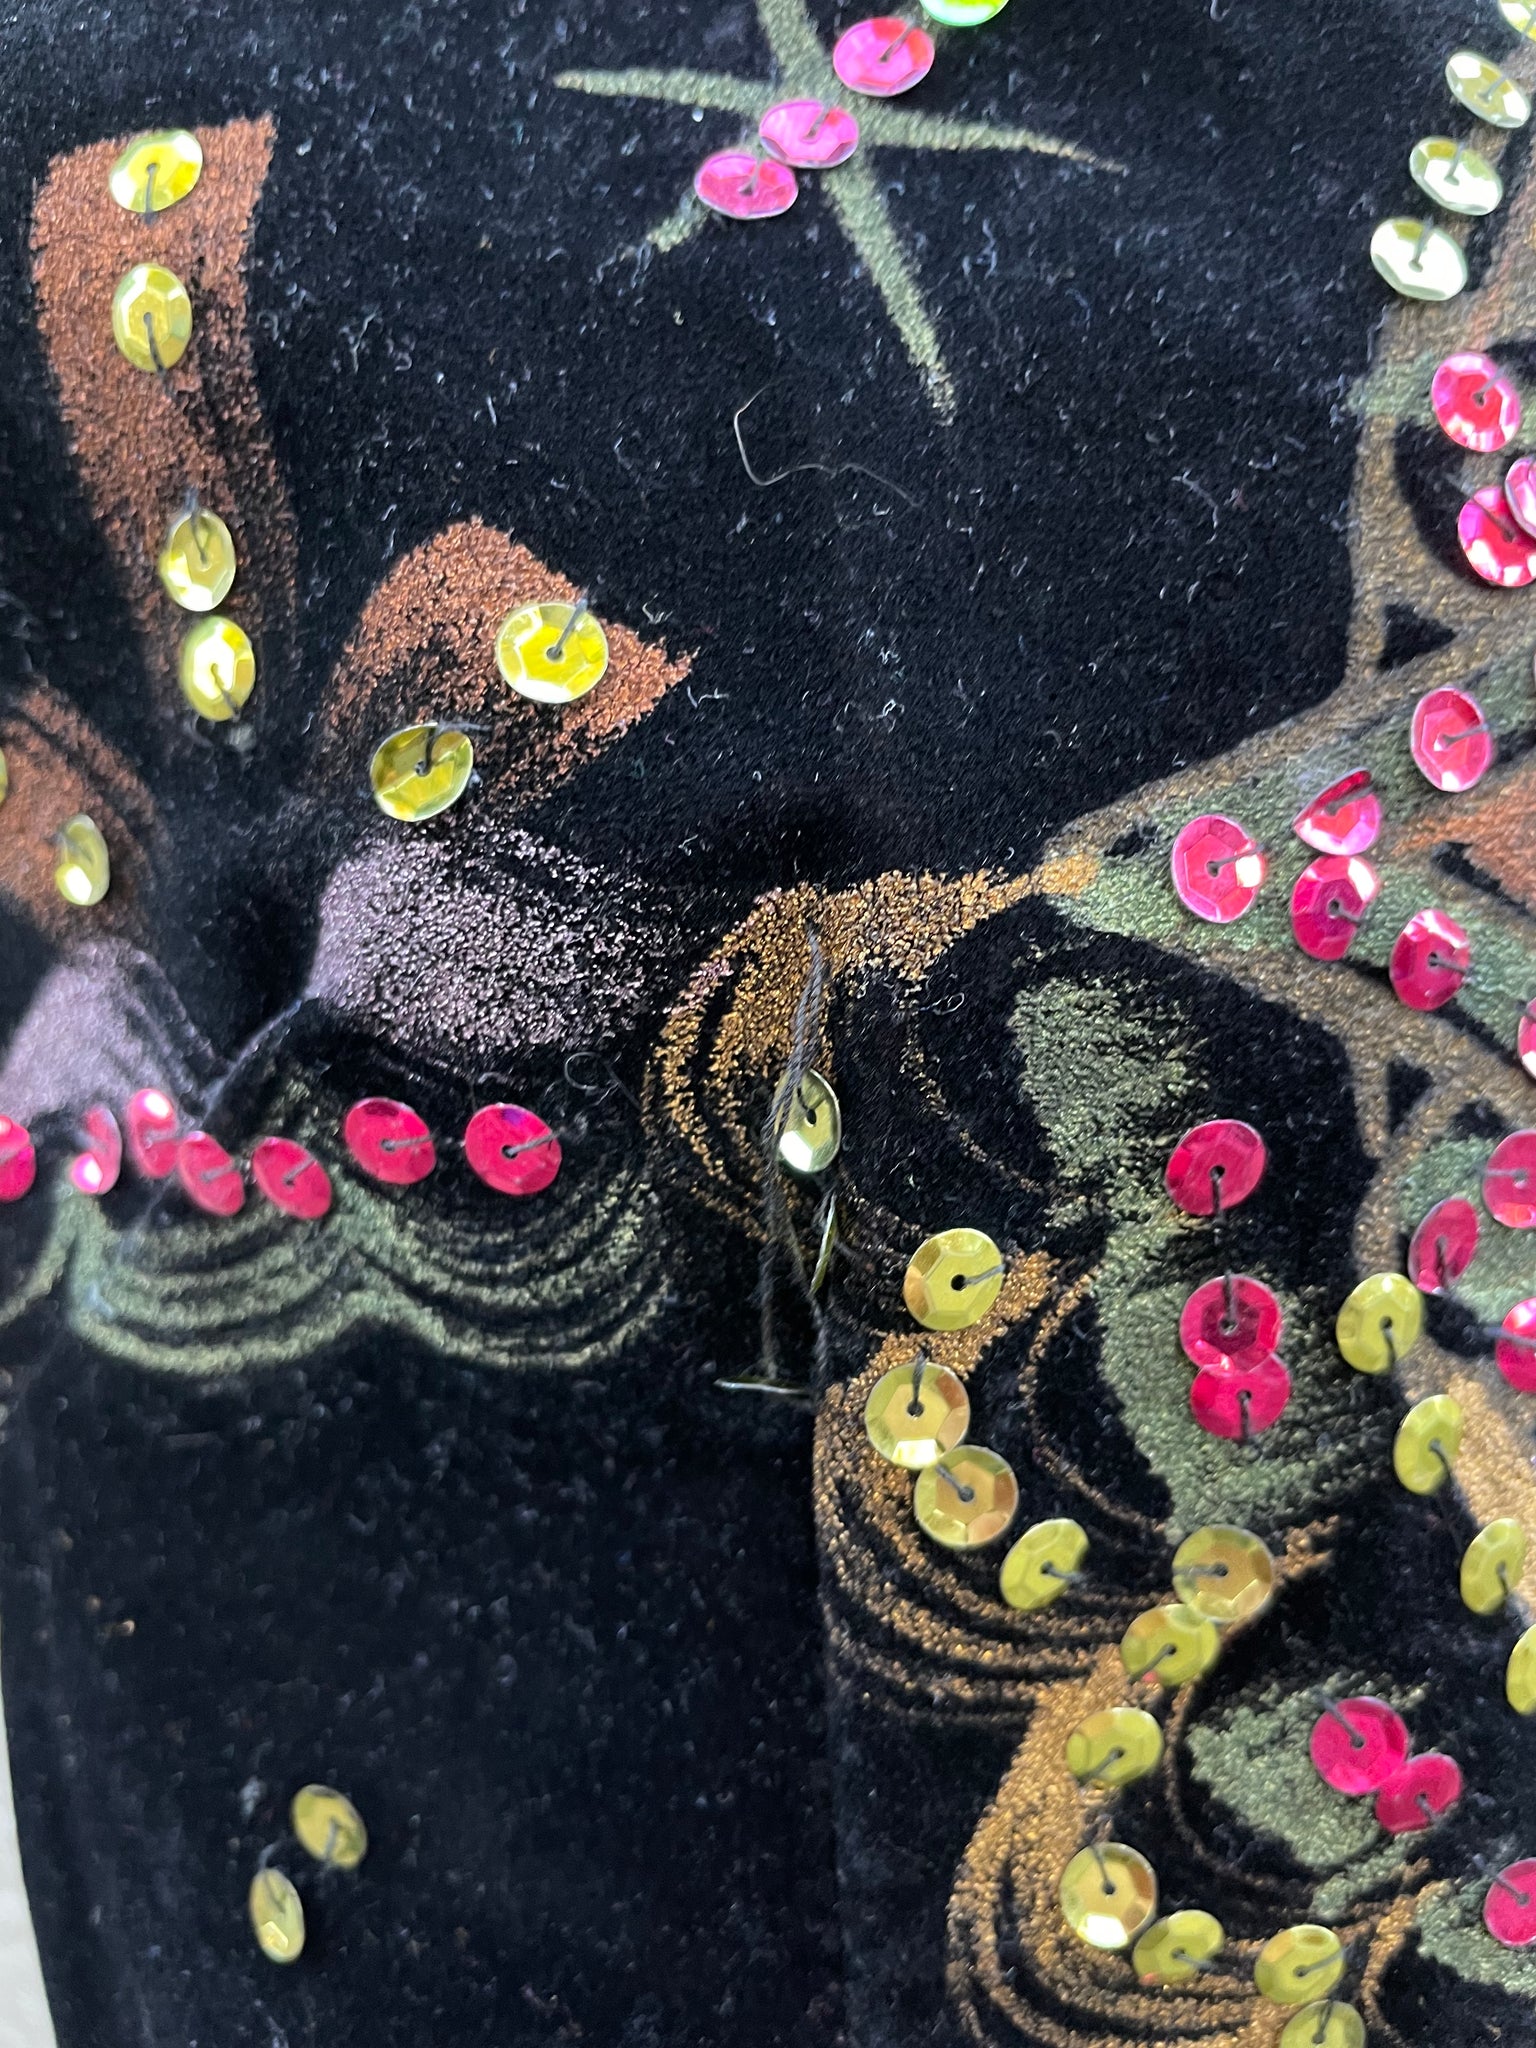 1950s Mexican Hand Painted Velvet Sequin Two Piece